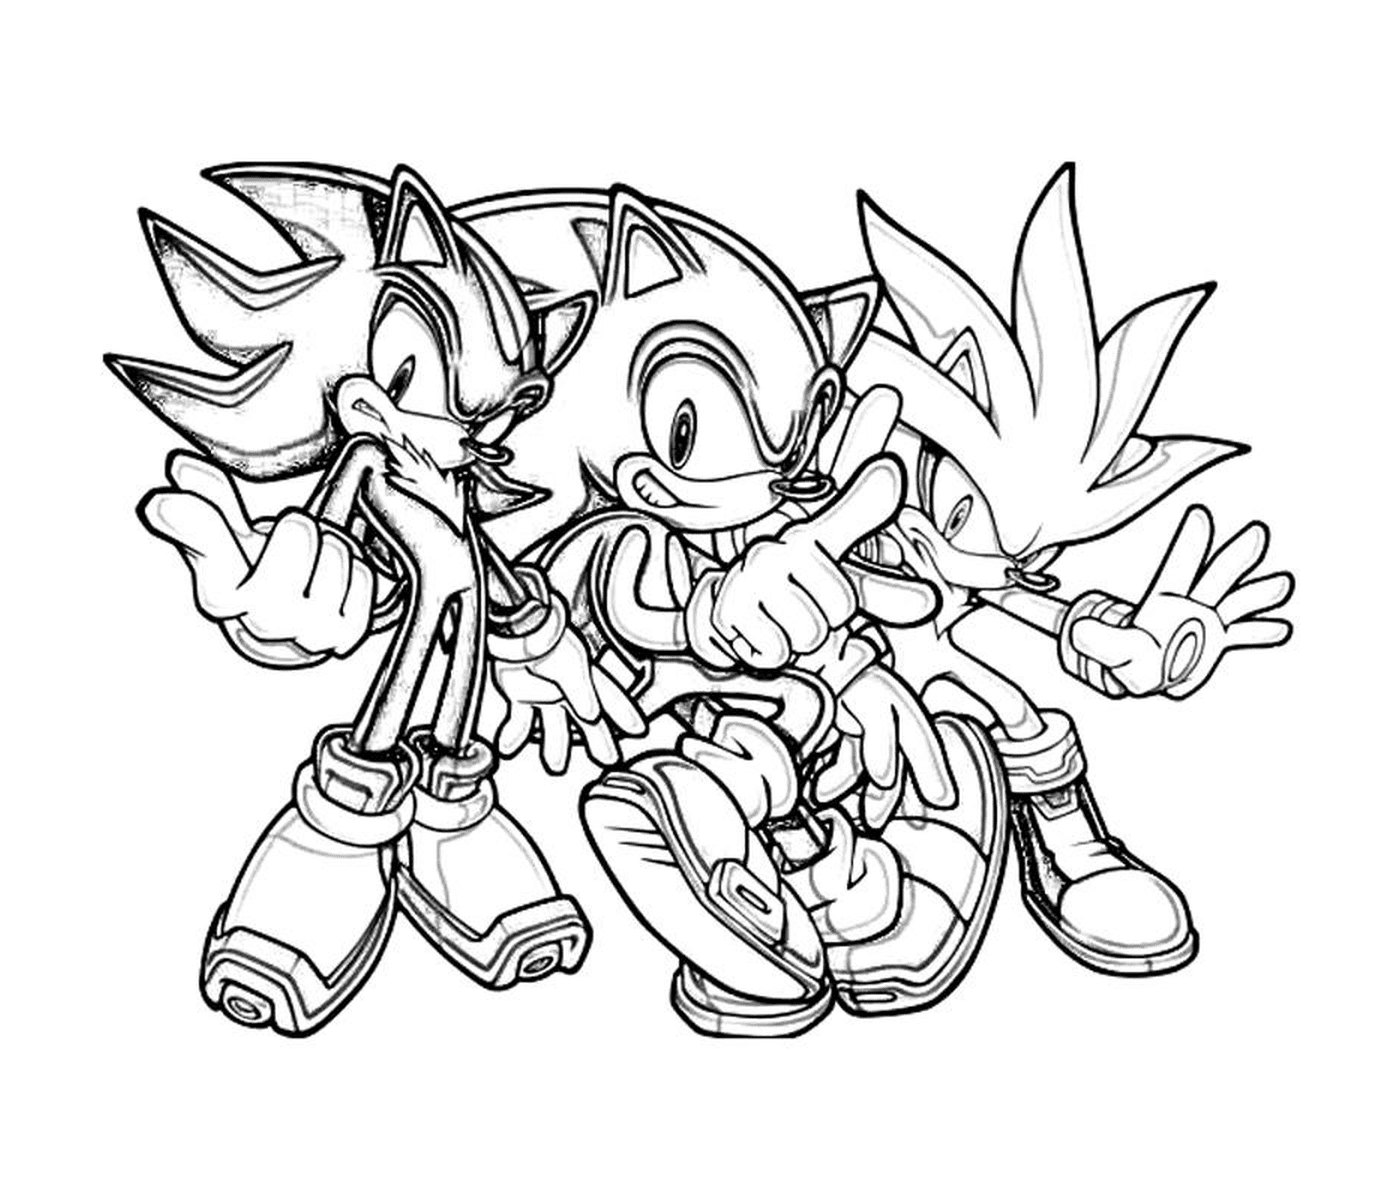  A band of energetic Sonic 